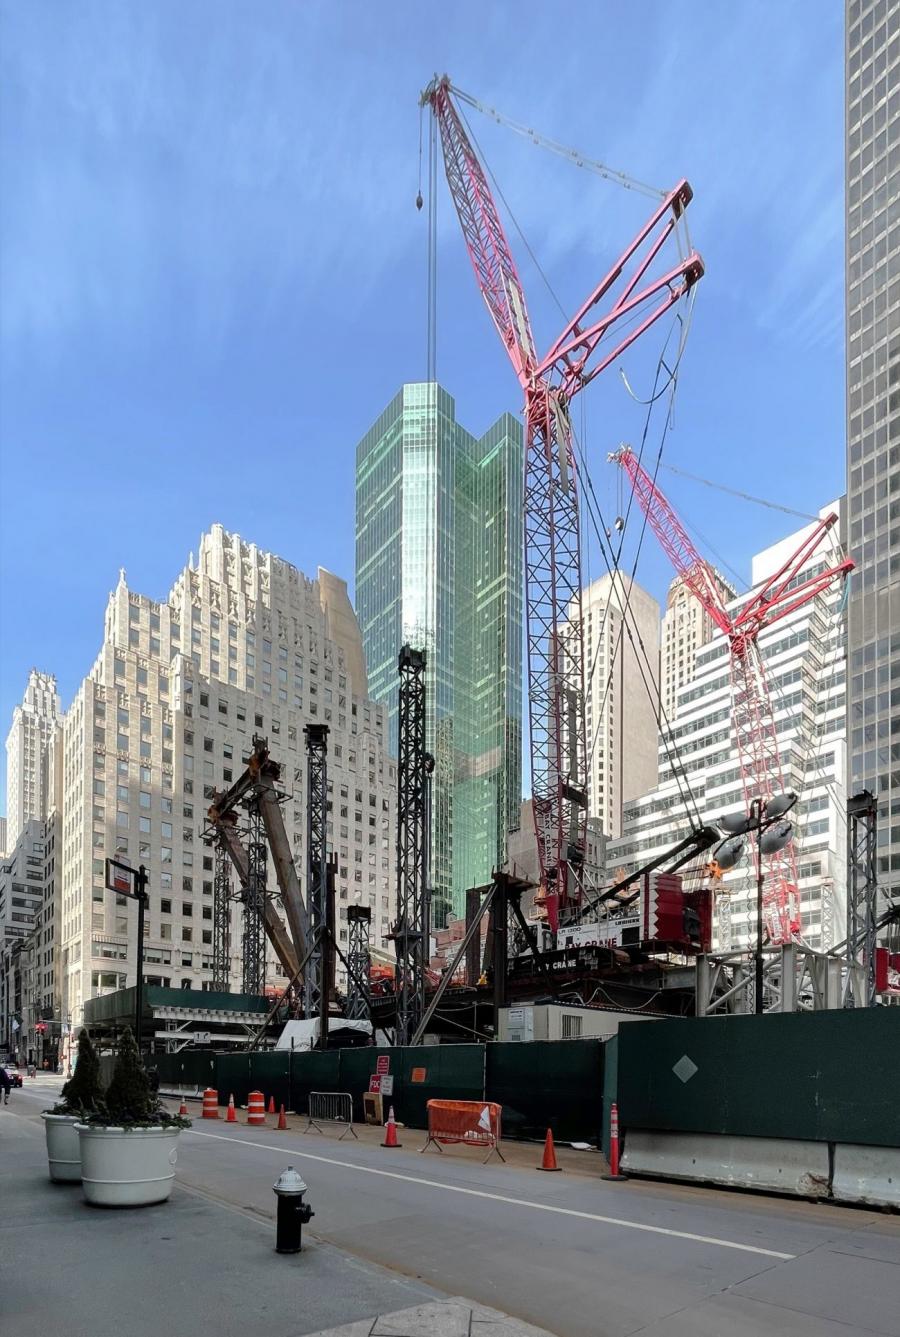 A fleet of construction cranes is assembling the massive framework that will eventually culminate in one of the tallest buildings in the New York City. (Michael Young photo)